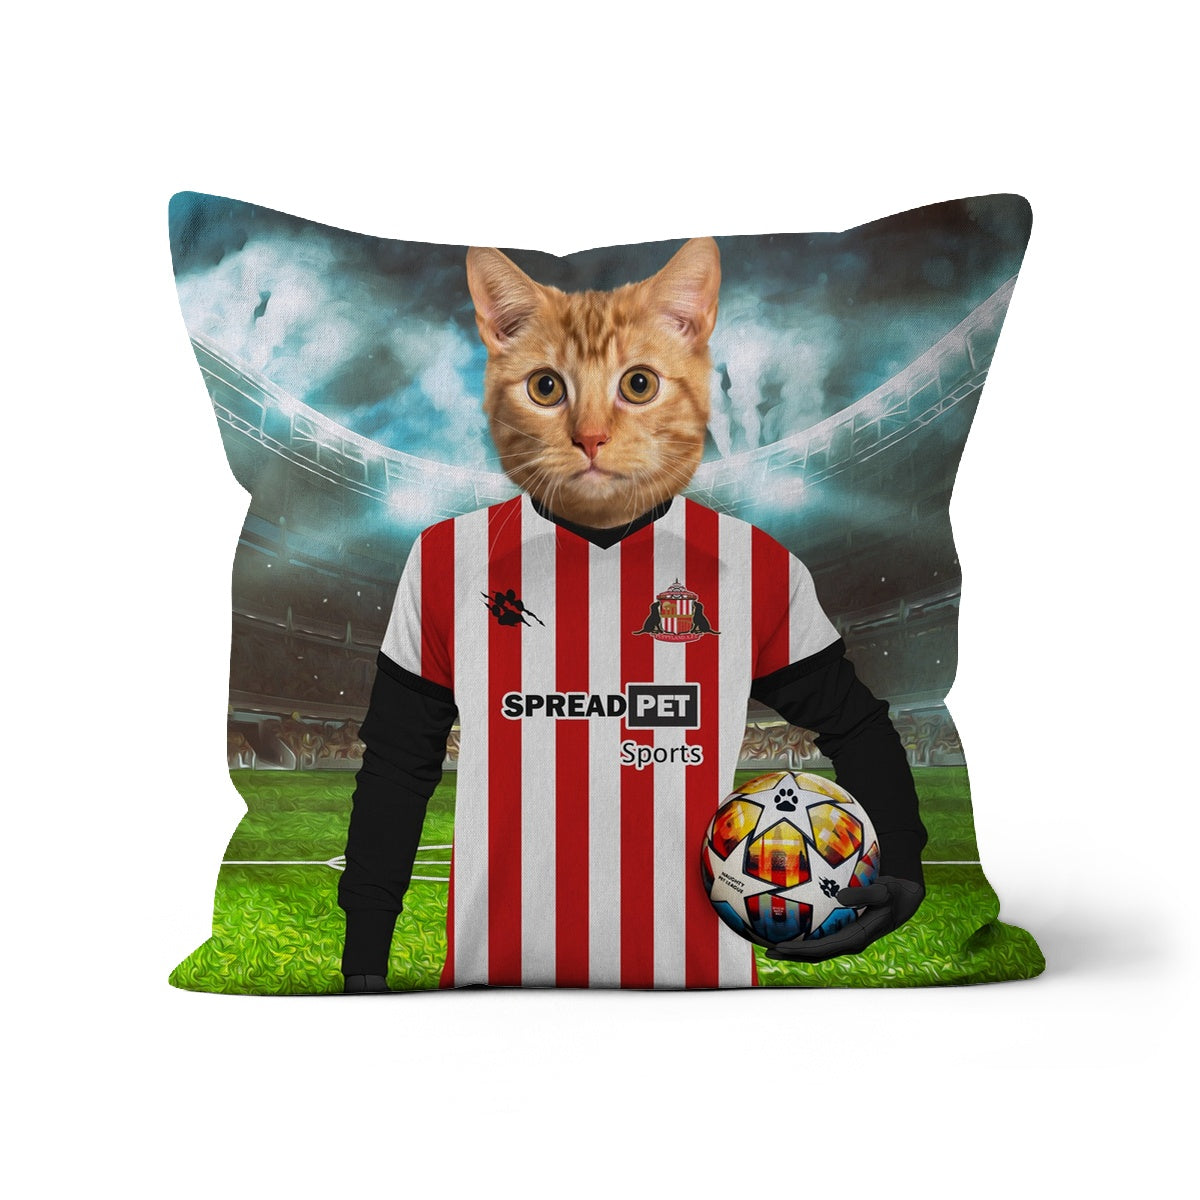 Sunderland Football Club, Paw & Glory, paw and glory, pillows with dogs picture, dog pillow custom, print pillows, make your pet a pillow, photo pet pillow, custom pet pillows, Pet Portrait cushion,